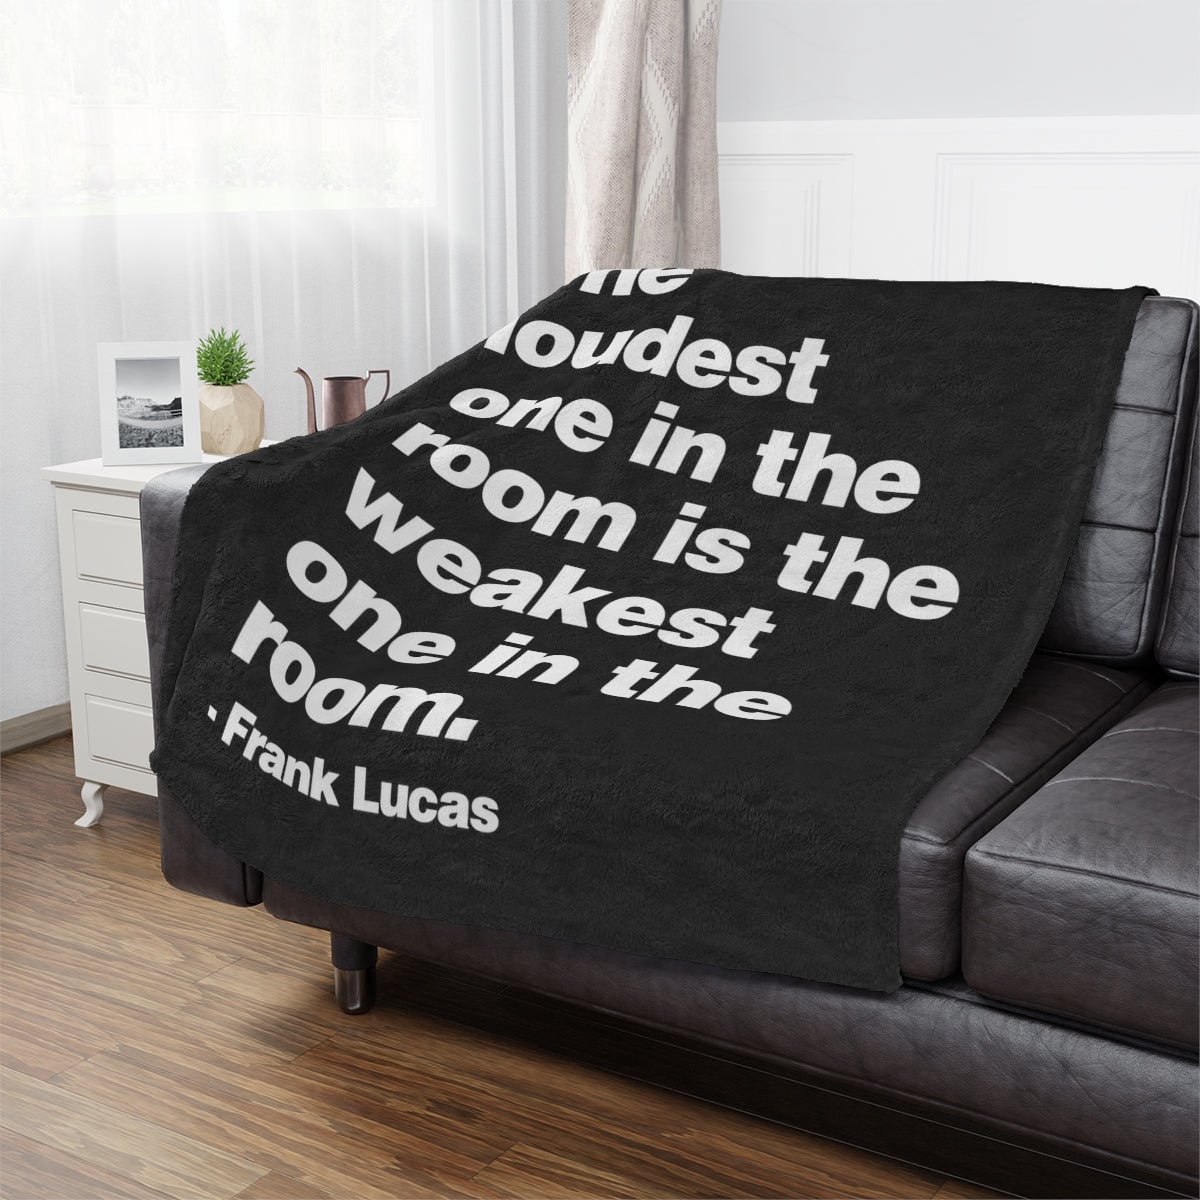 Notorious Mobster Homage - Cozy Blanket with Soft and Luxurious Materials